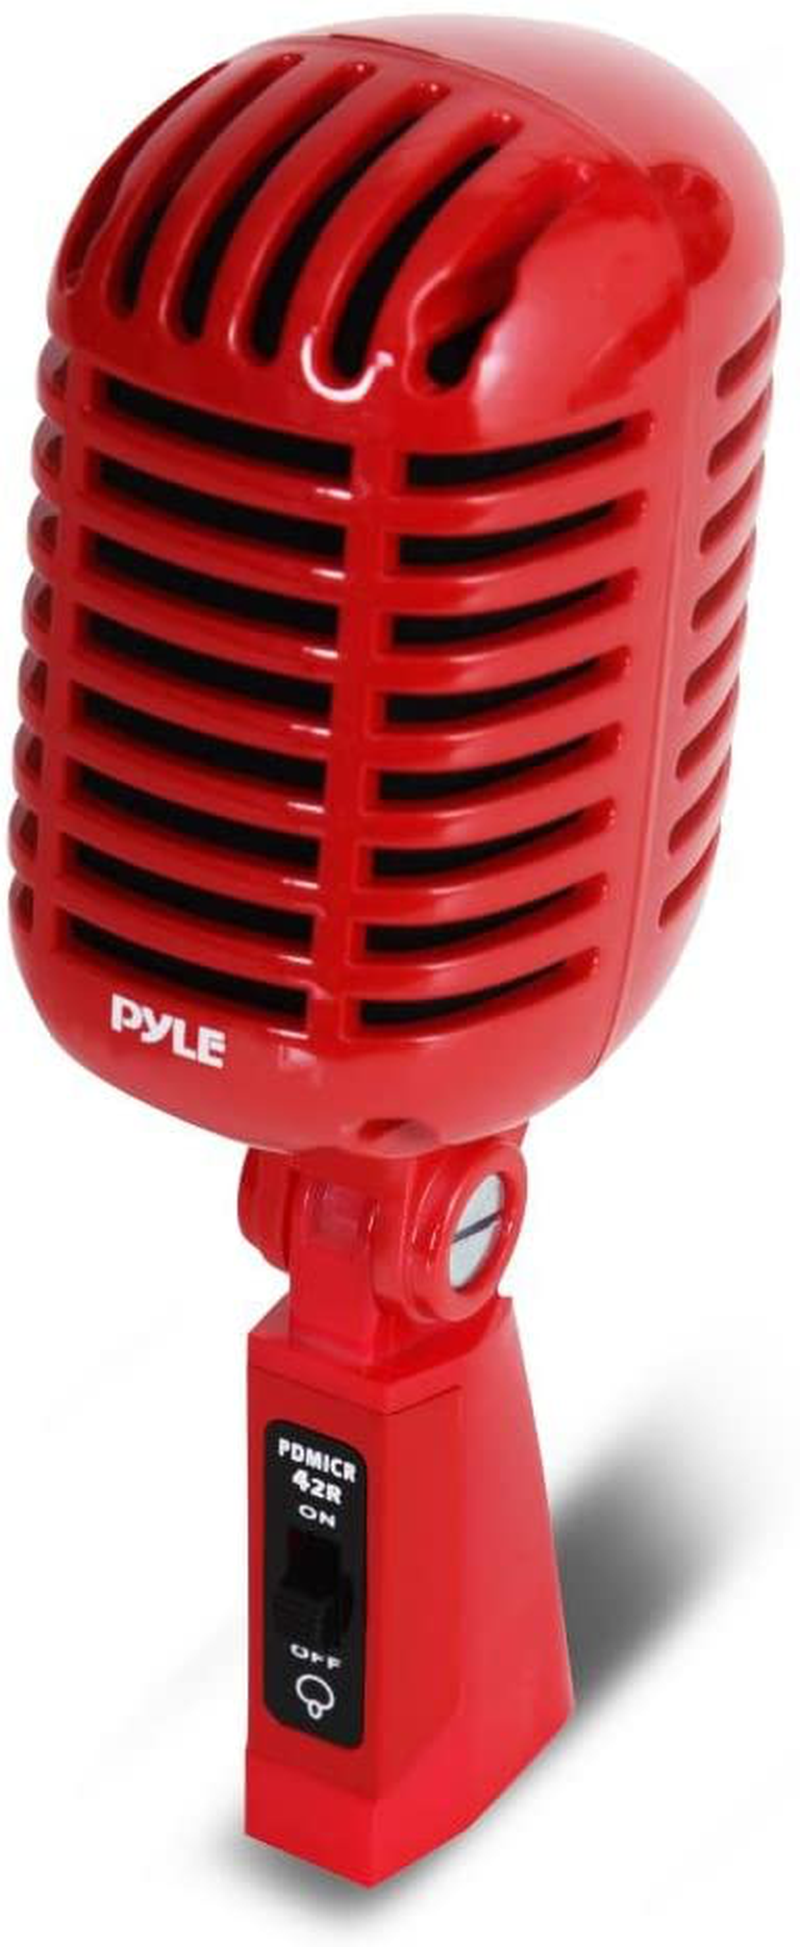 Classic Retro Dynamic Vocal Microphone - Old Vintage Style Unidirectional Cardioid Mic with XLR Cable - Universal Stand Compatible - Live Performance In Studio Recording - Pyle PDMICR42SL (Silver)